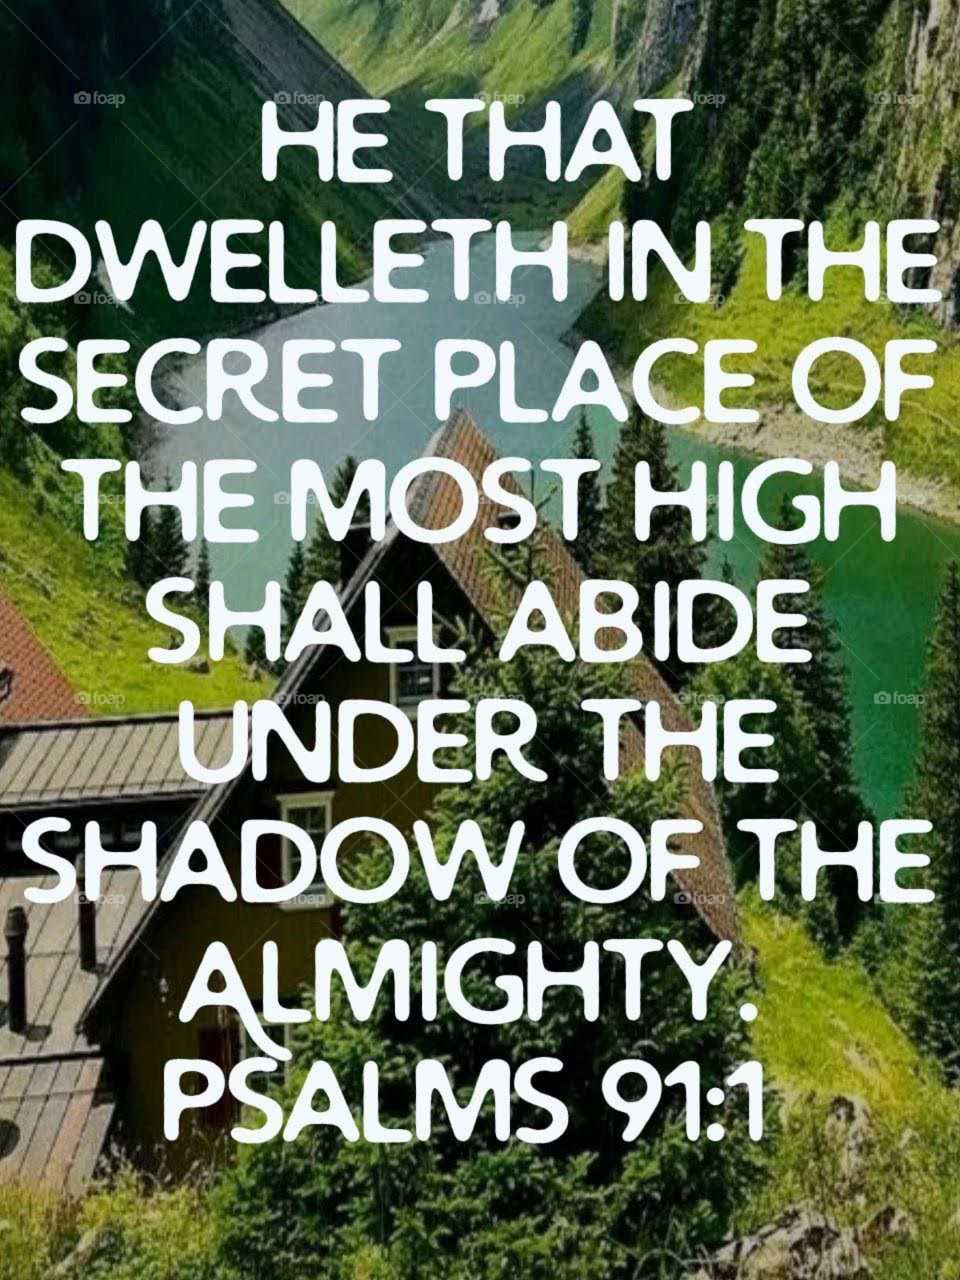 Dwelling under the shadow of the Almighty